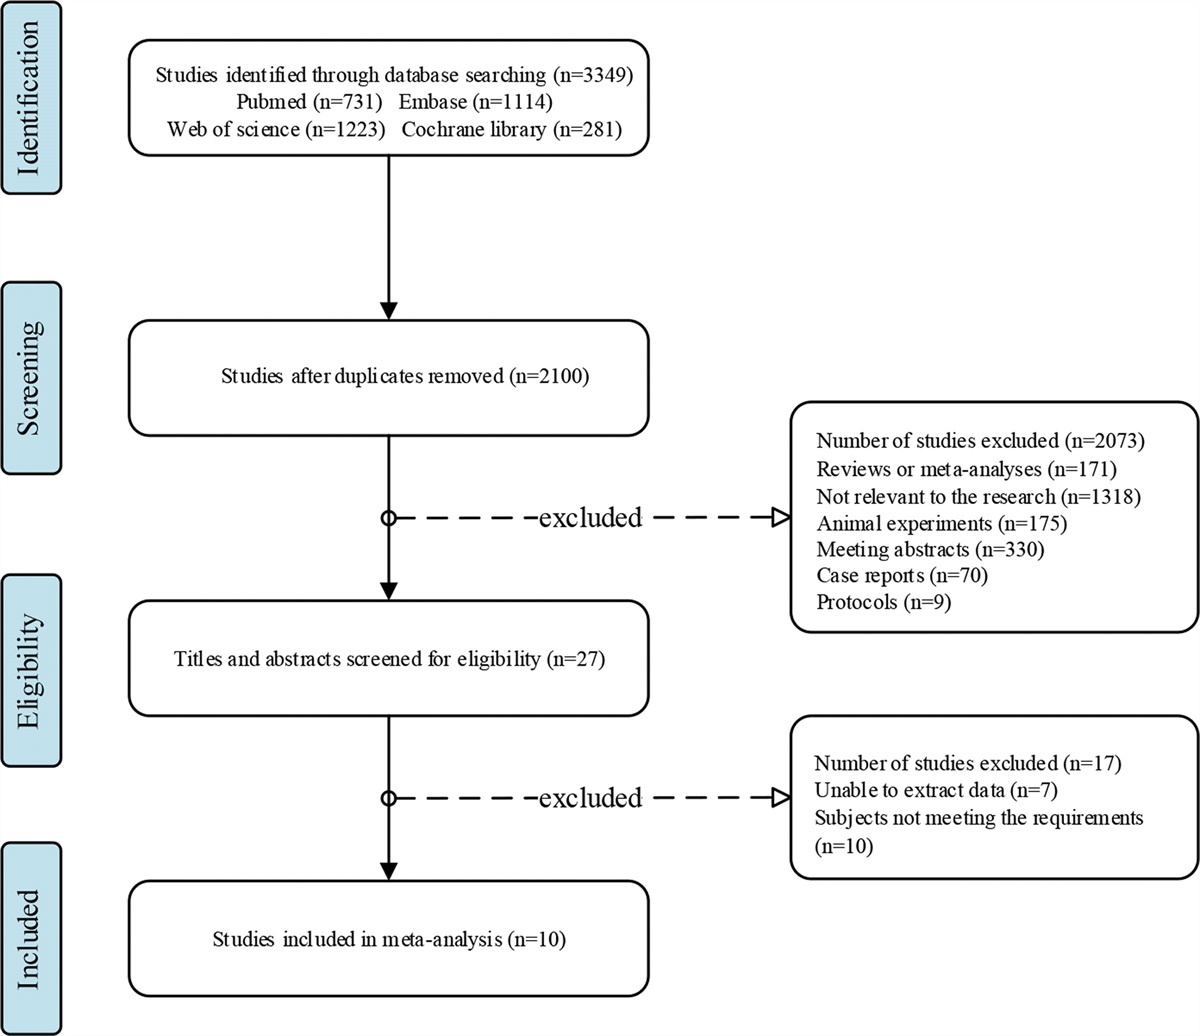 Oral glucose gel in the prevention of neonatal hypoglycemia: A systematic review and meta-analysis